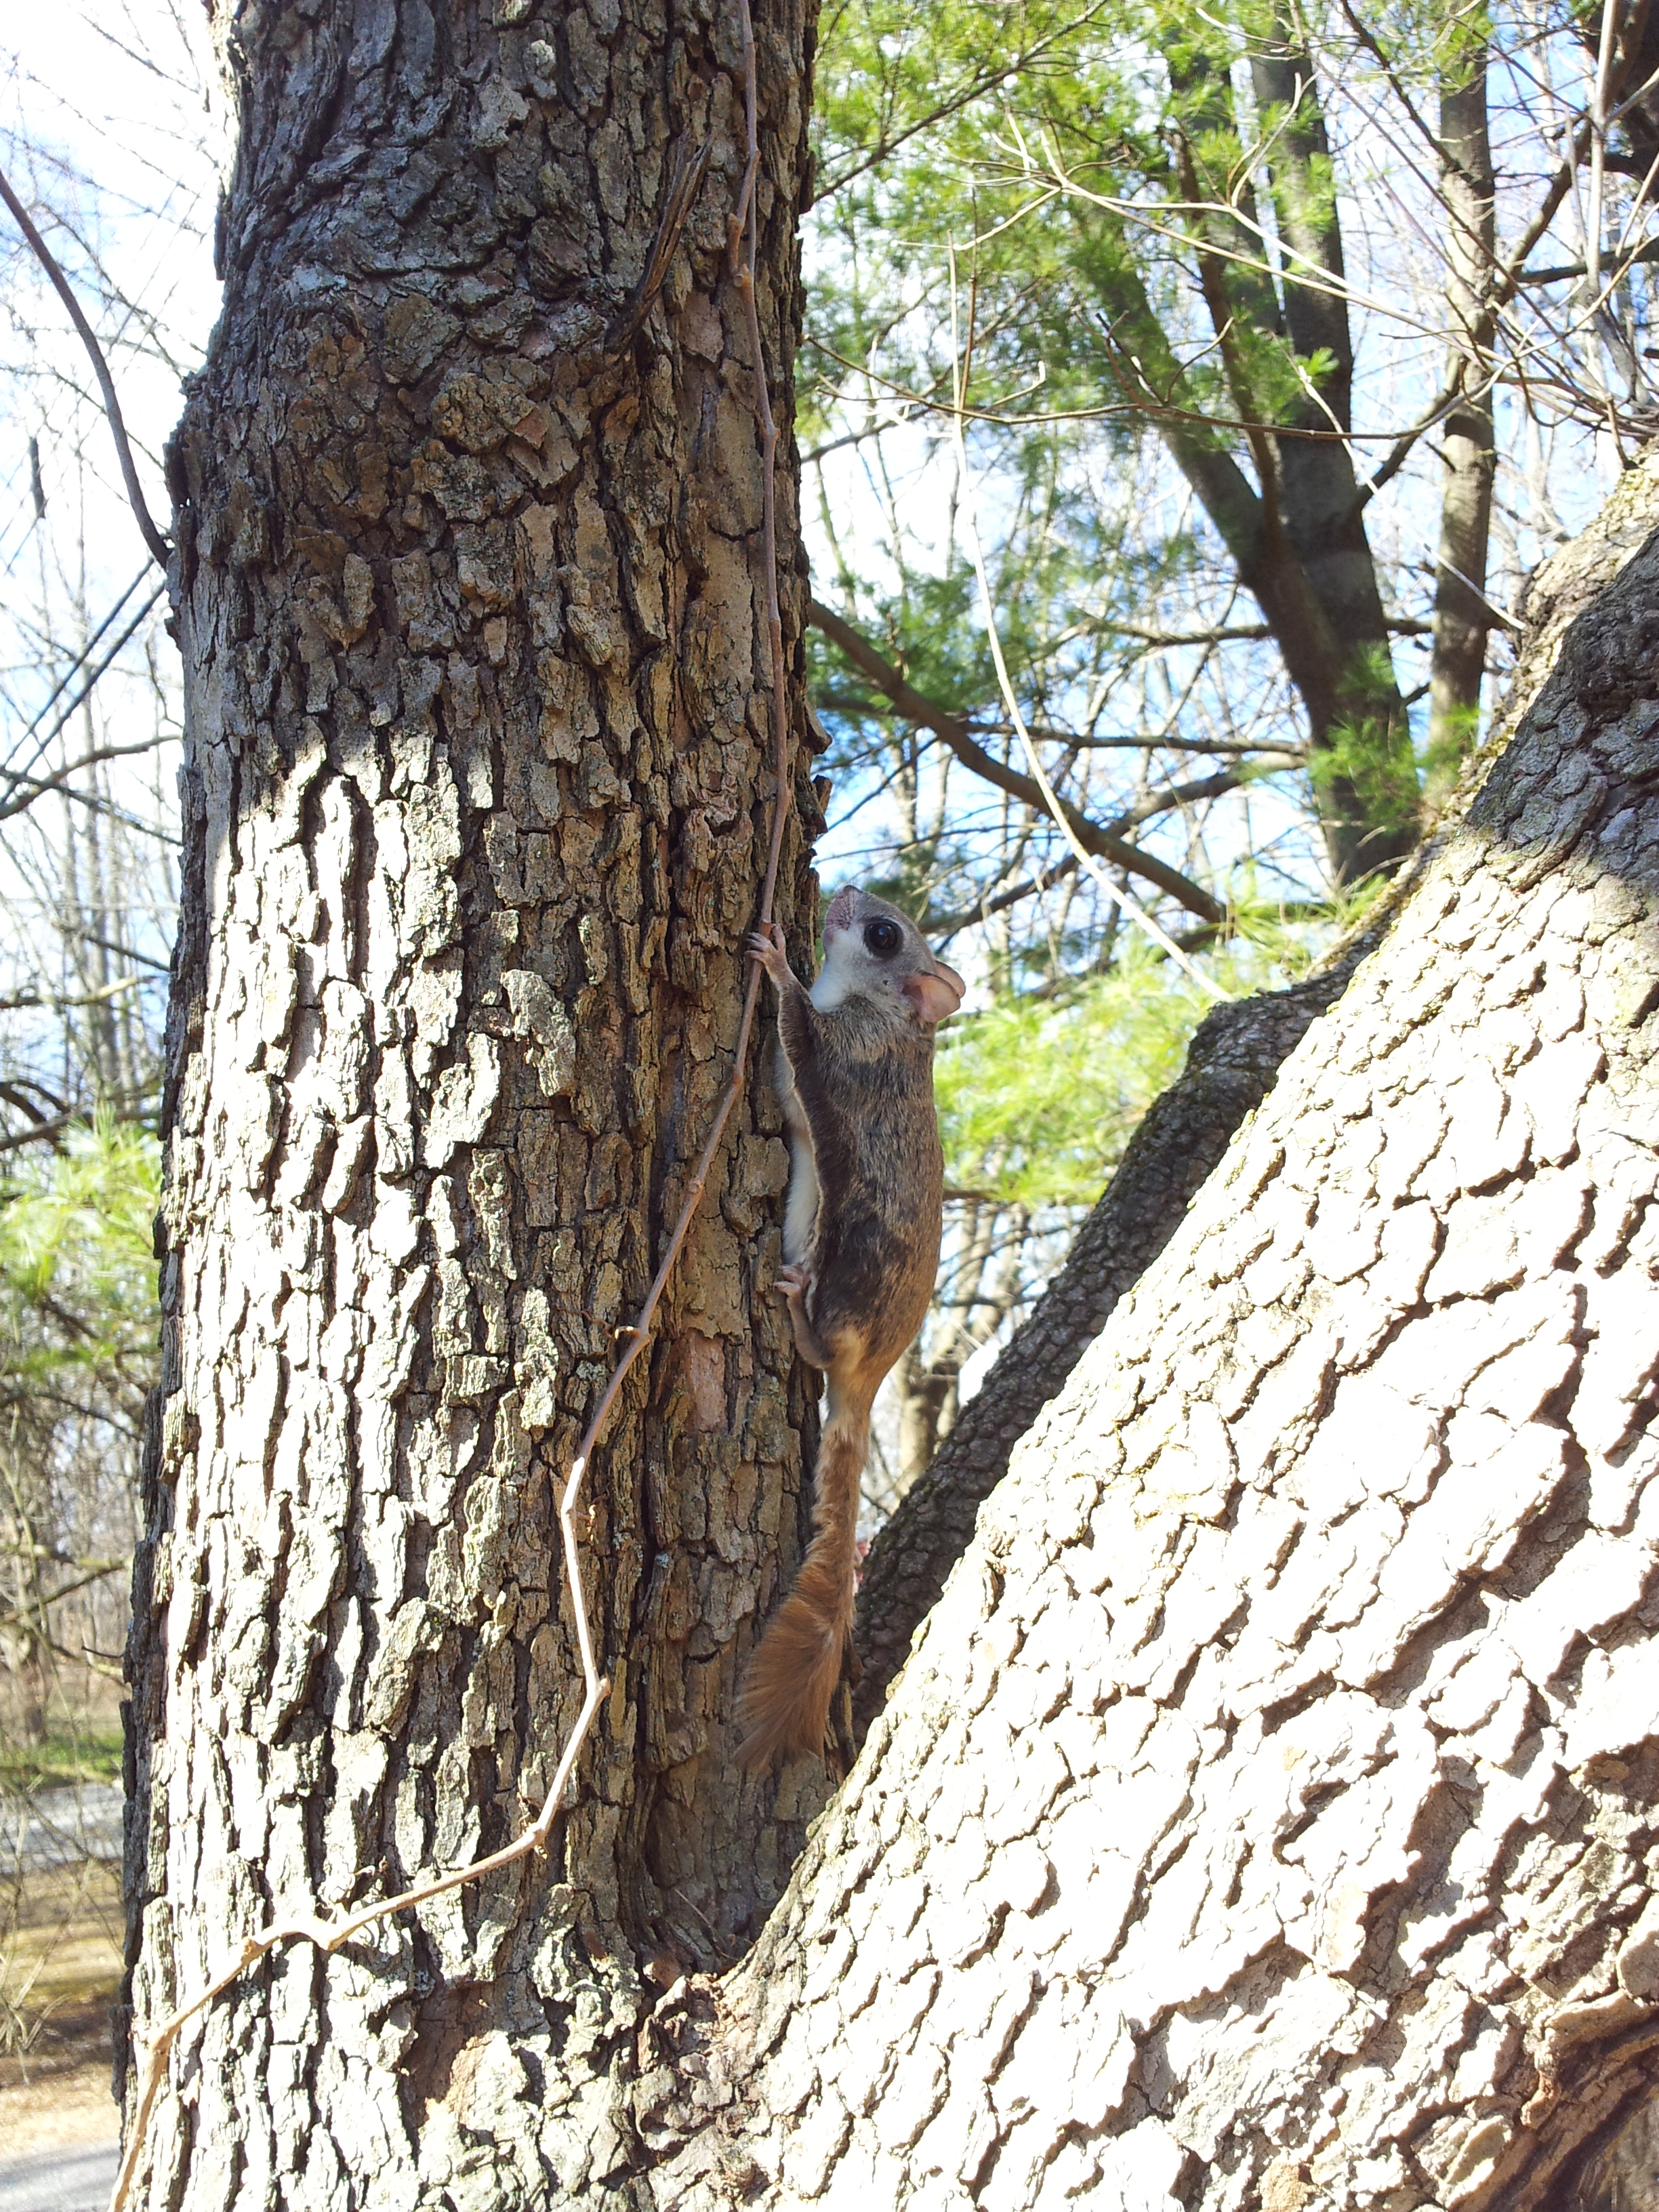 File:Southern flying squirrel on tree closeup 2.jpg - Wikimedia Commons